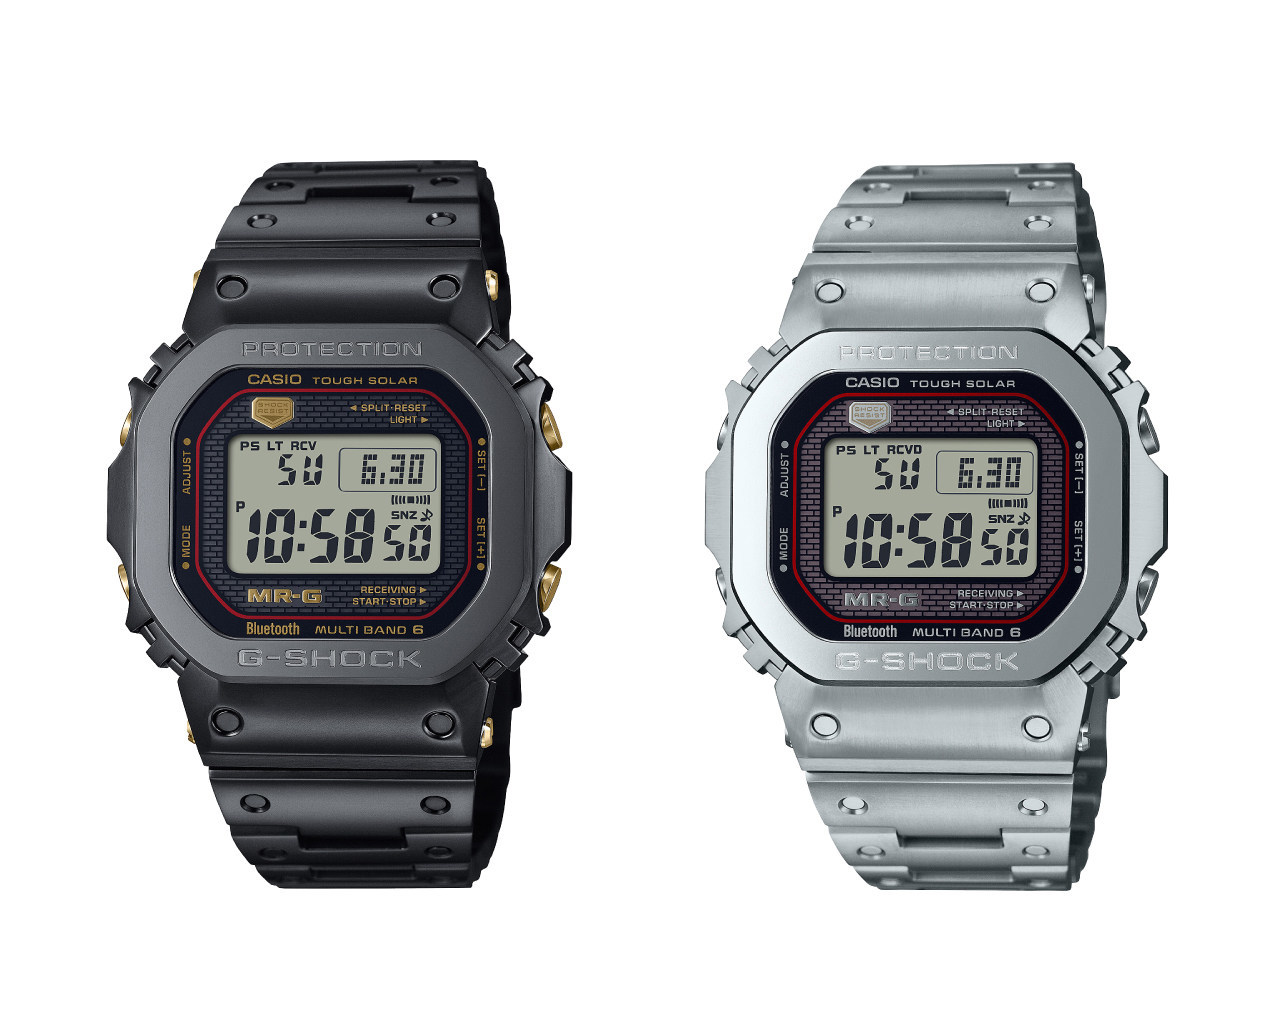 G-SHOCK unveils $4,000 MR-G watch in the style of its original DW 